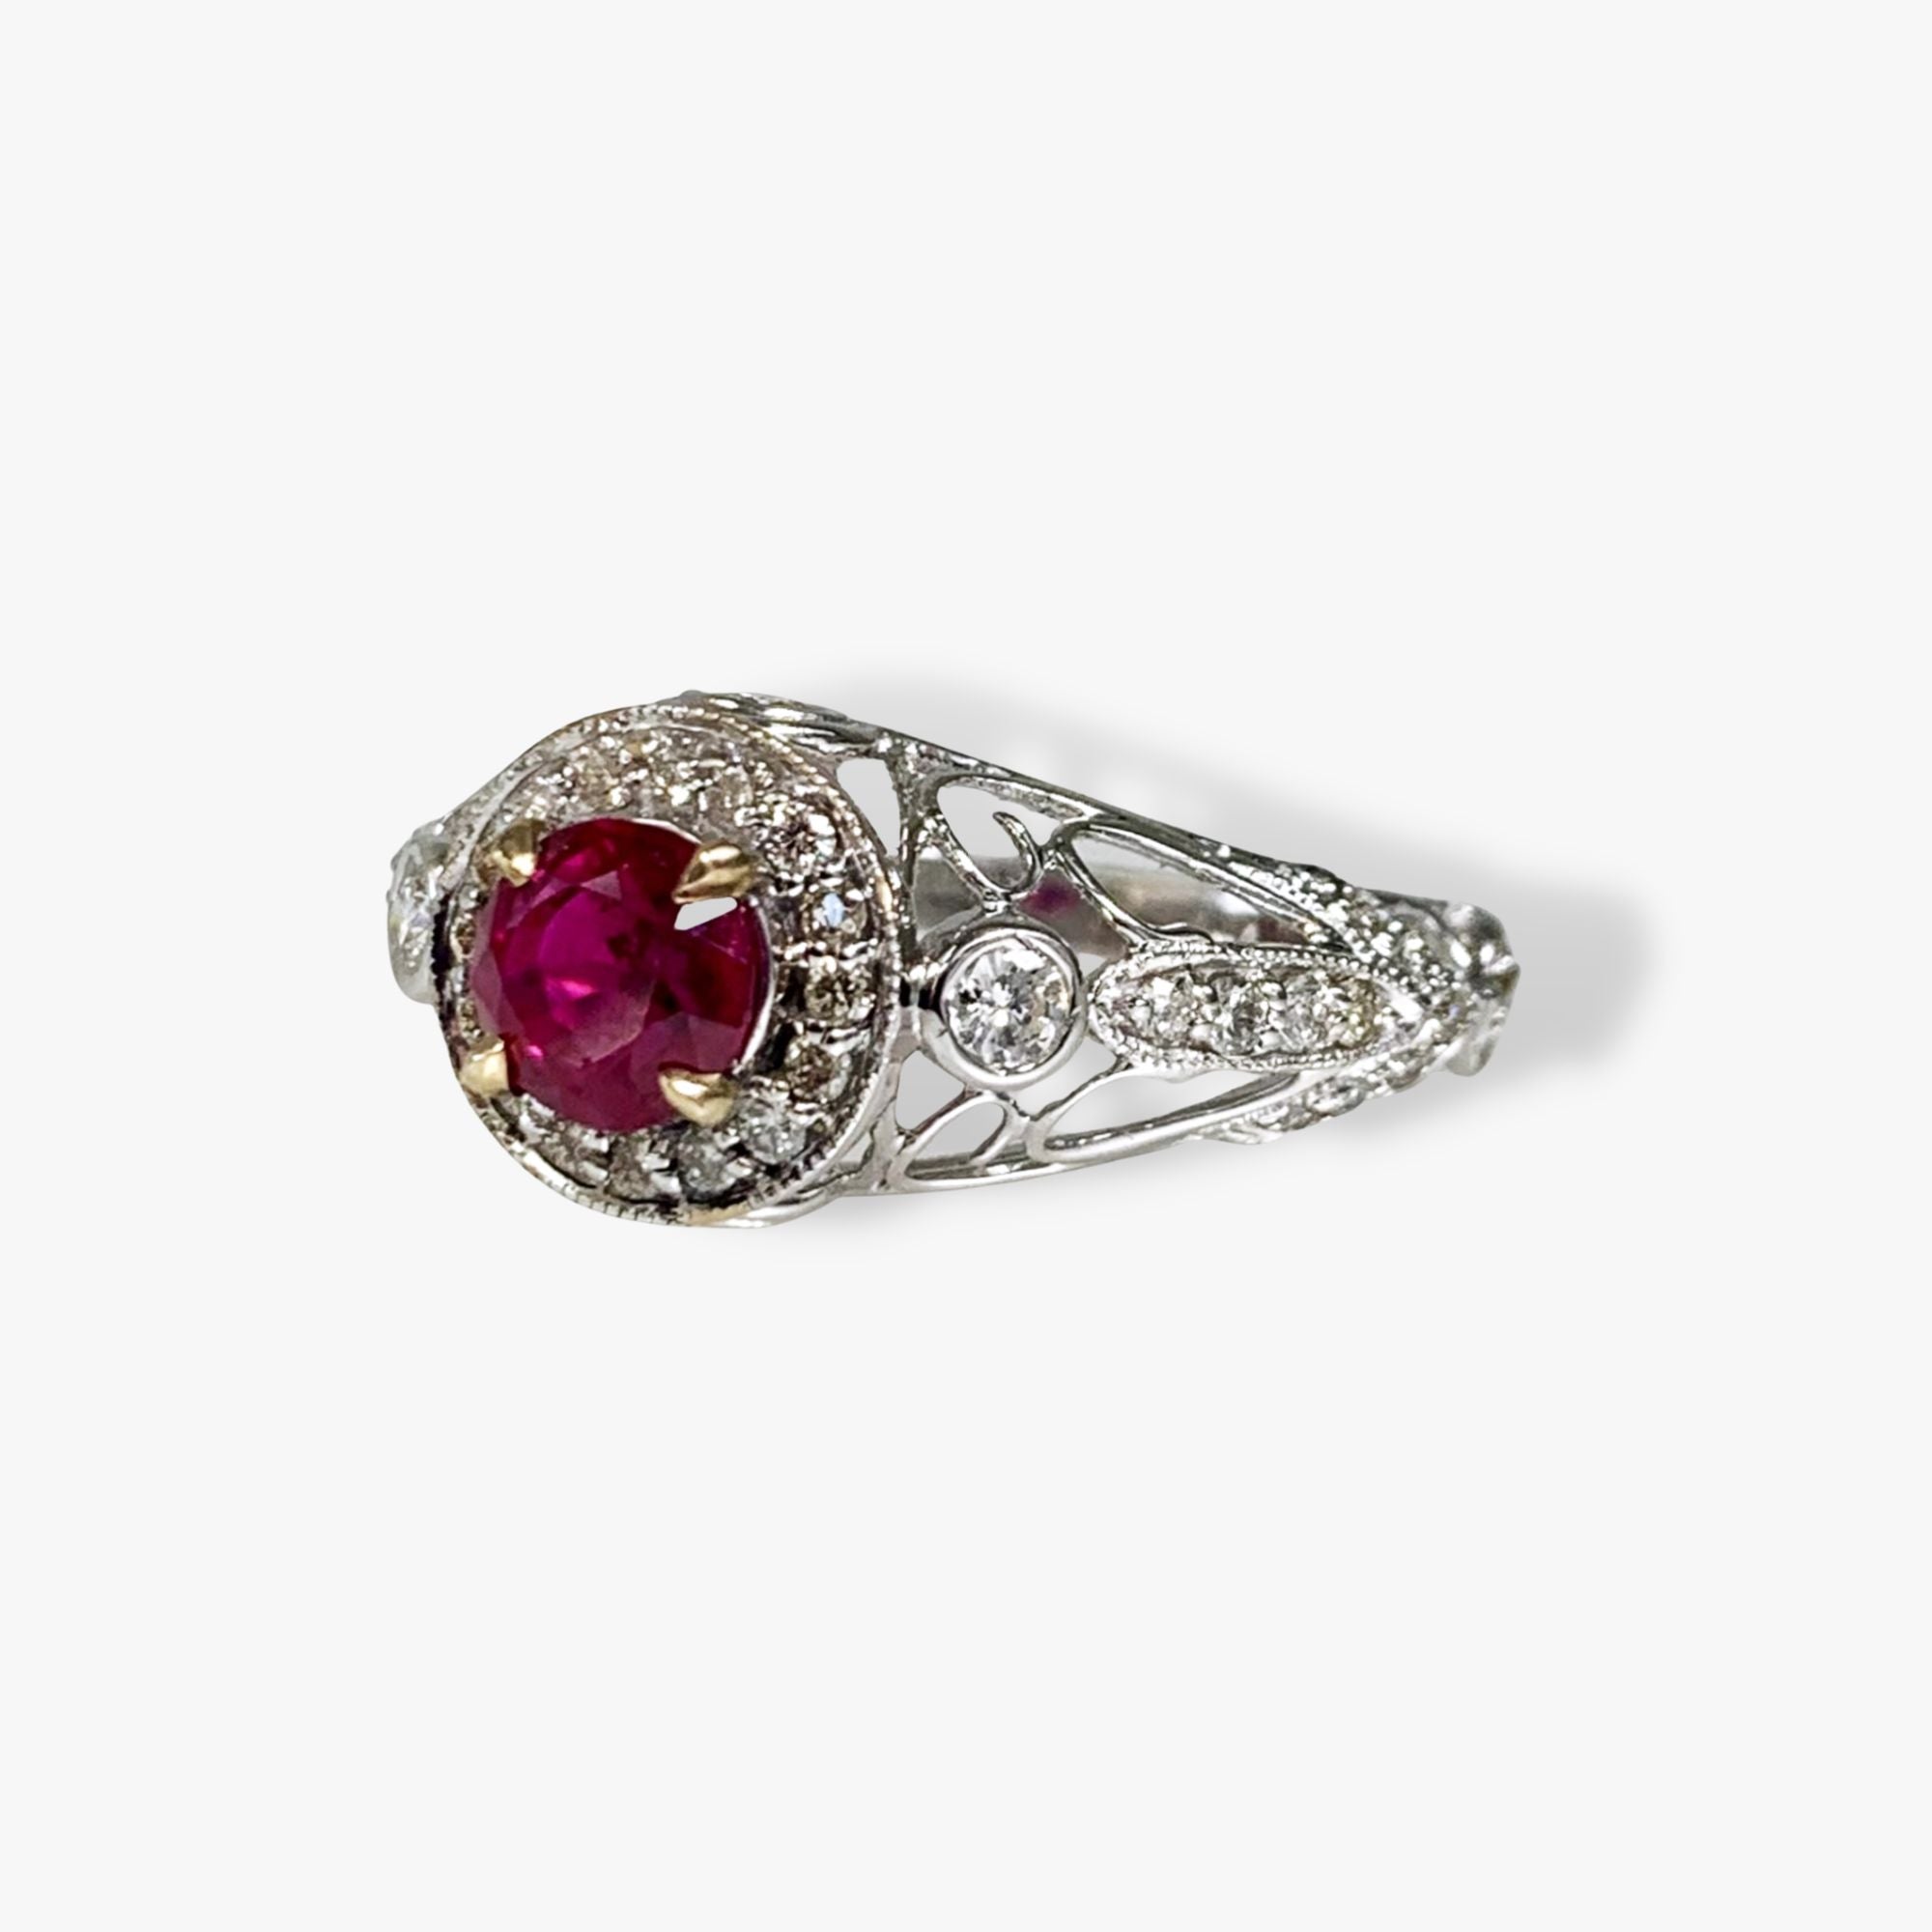 18k White Gold Round Cut Ruby and Diamond Ring Side View